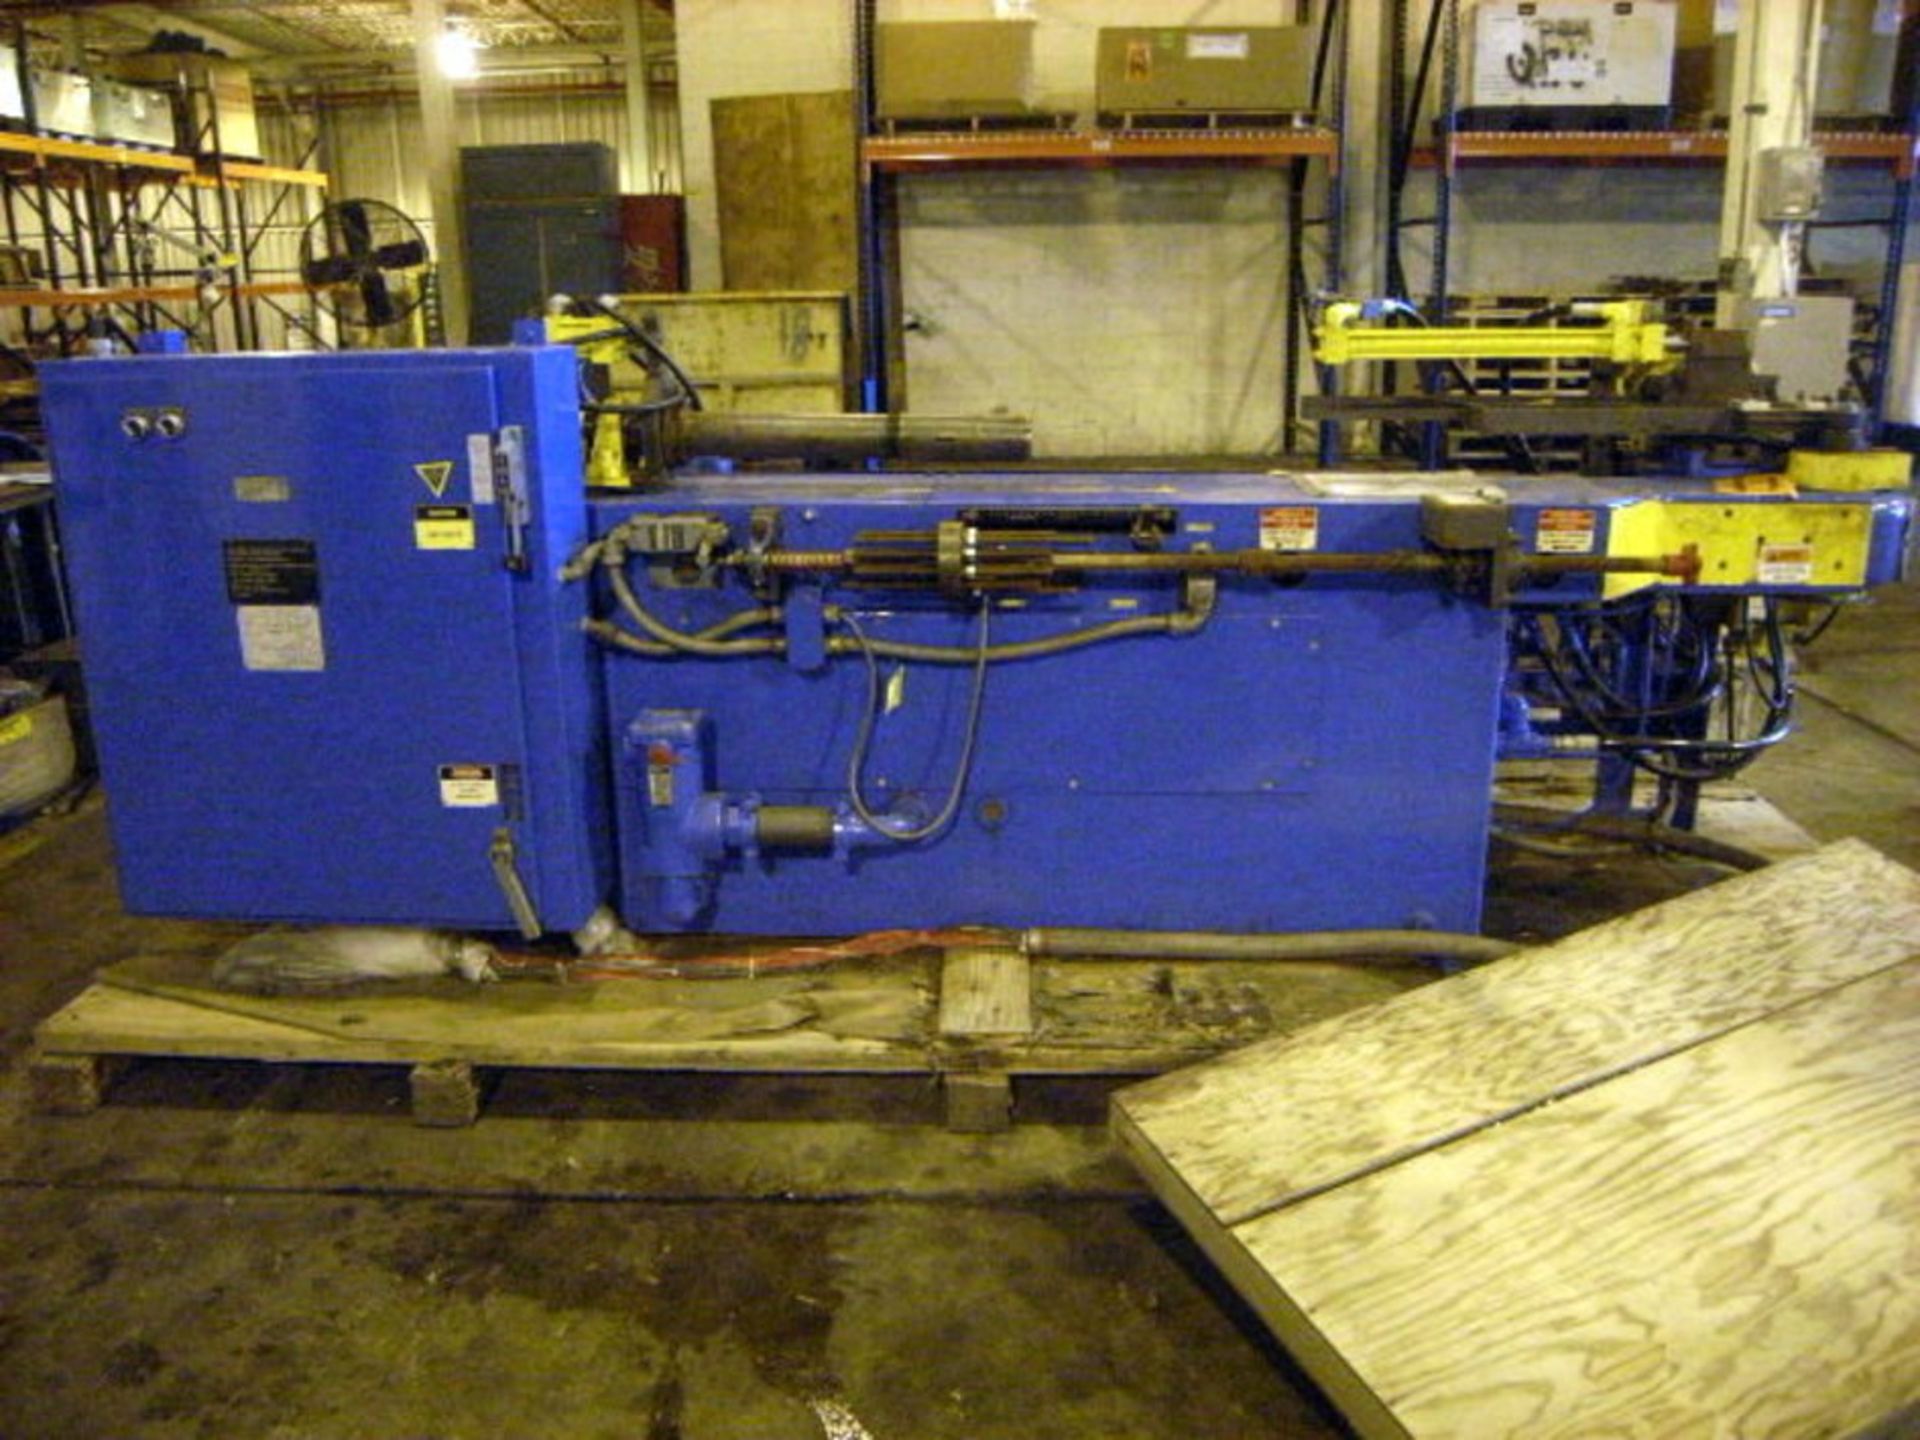 Pines Horizontal Hydraulic Tube Bender, 1 1/2" x 0.188", Mdl: #1 - Painesville, OH - 7116P - Image 5 of 35